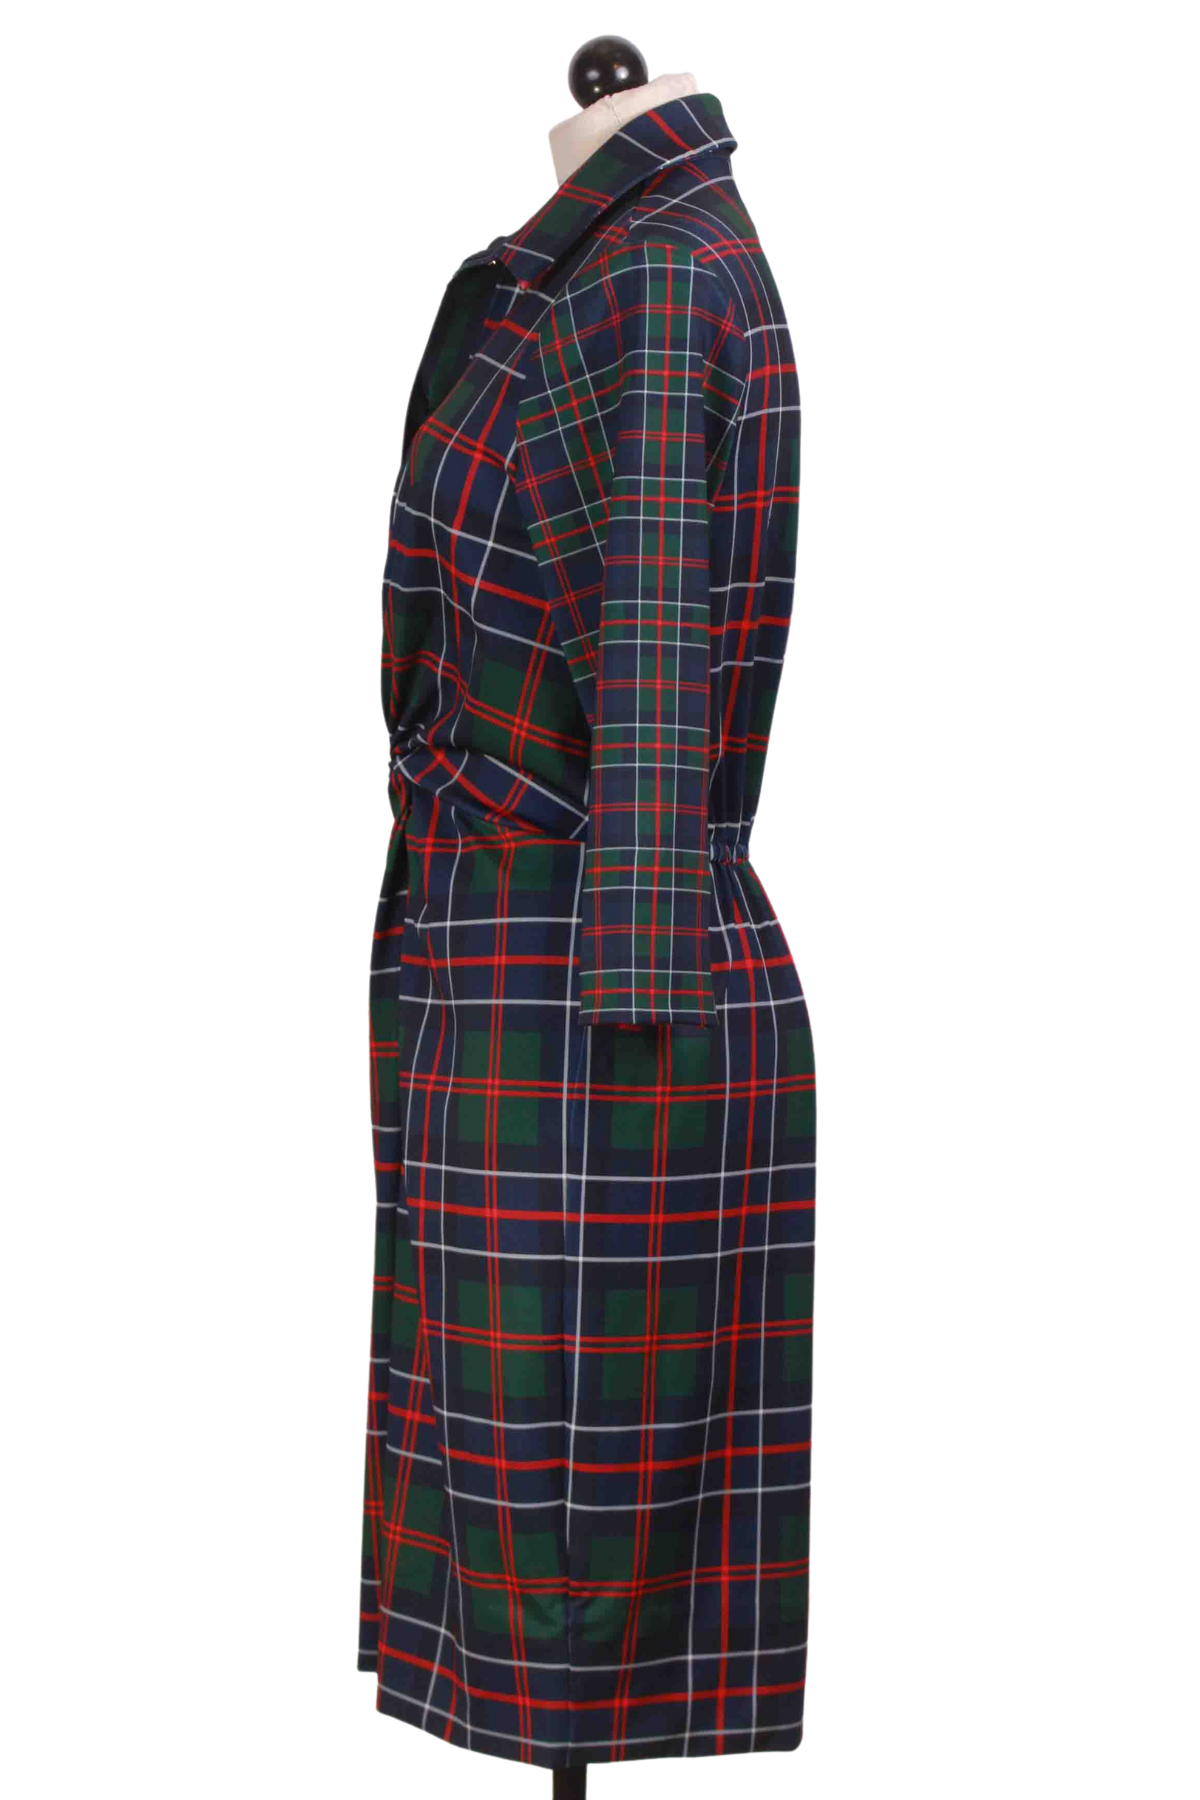 side view of Balmoral Plaid Twist and Shout Dress by Gretchen Scott